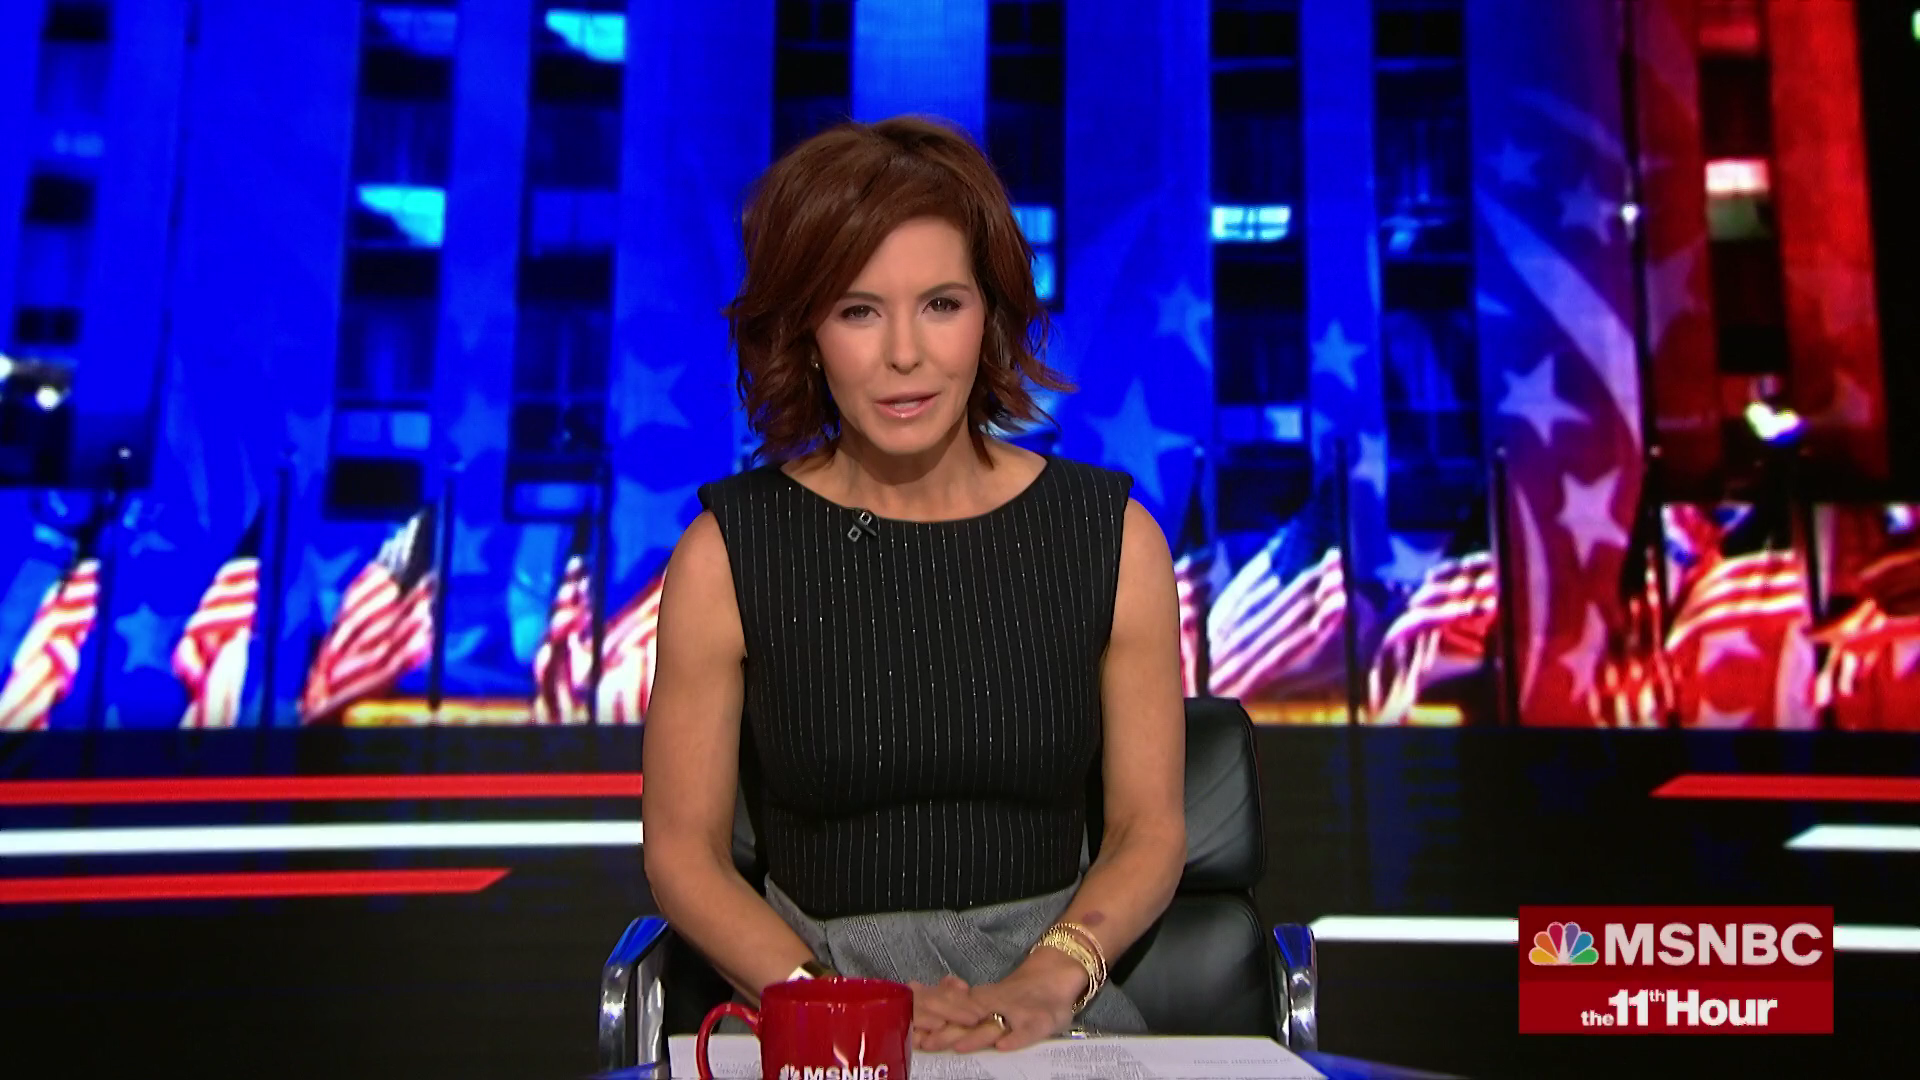 The 11th Hour With Stephanie Ruhle 2022-03-09-2300 (02).png